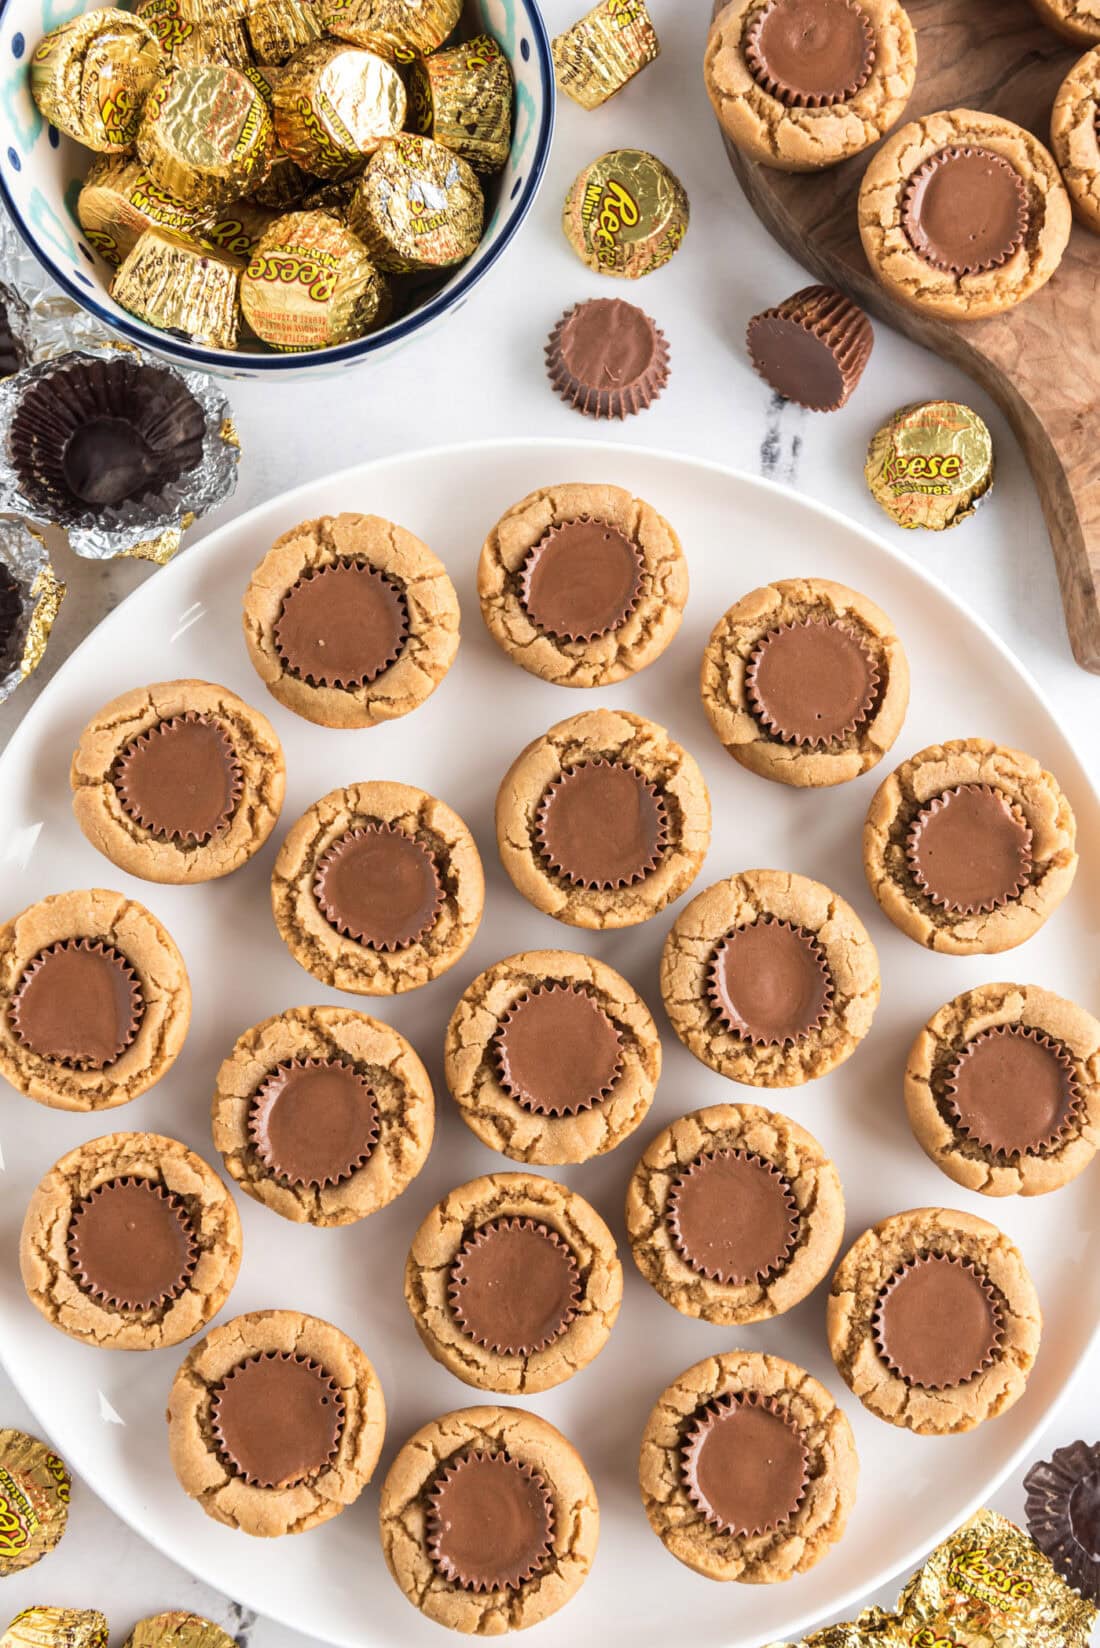 Reese’s Peanut Butter Cup Cookies on a plate